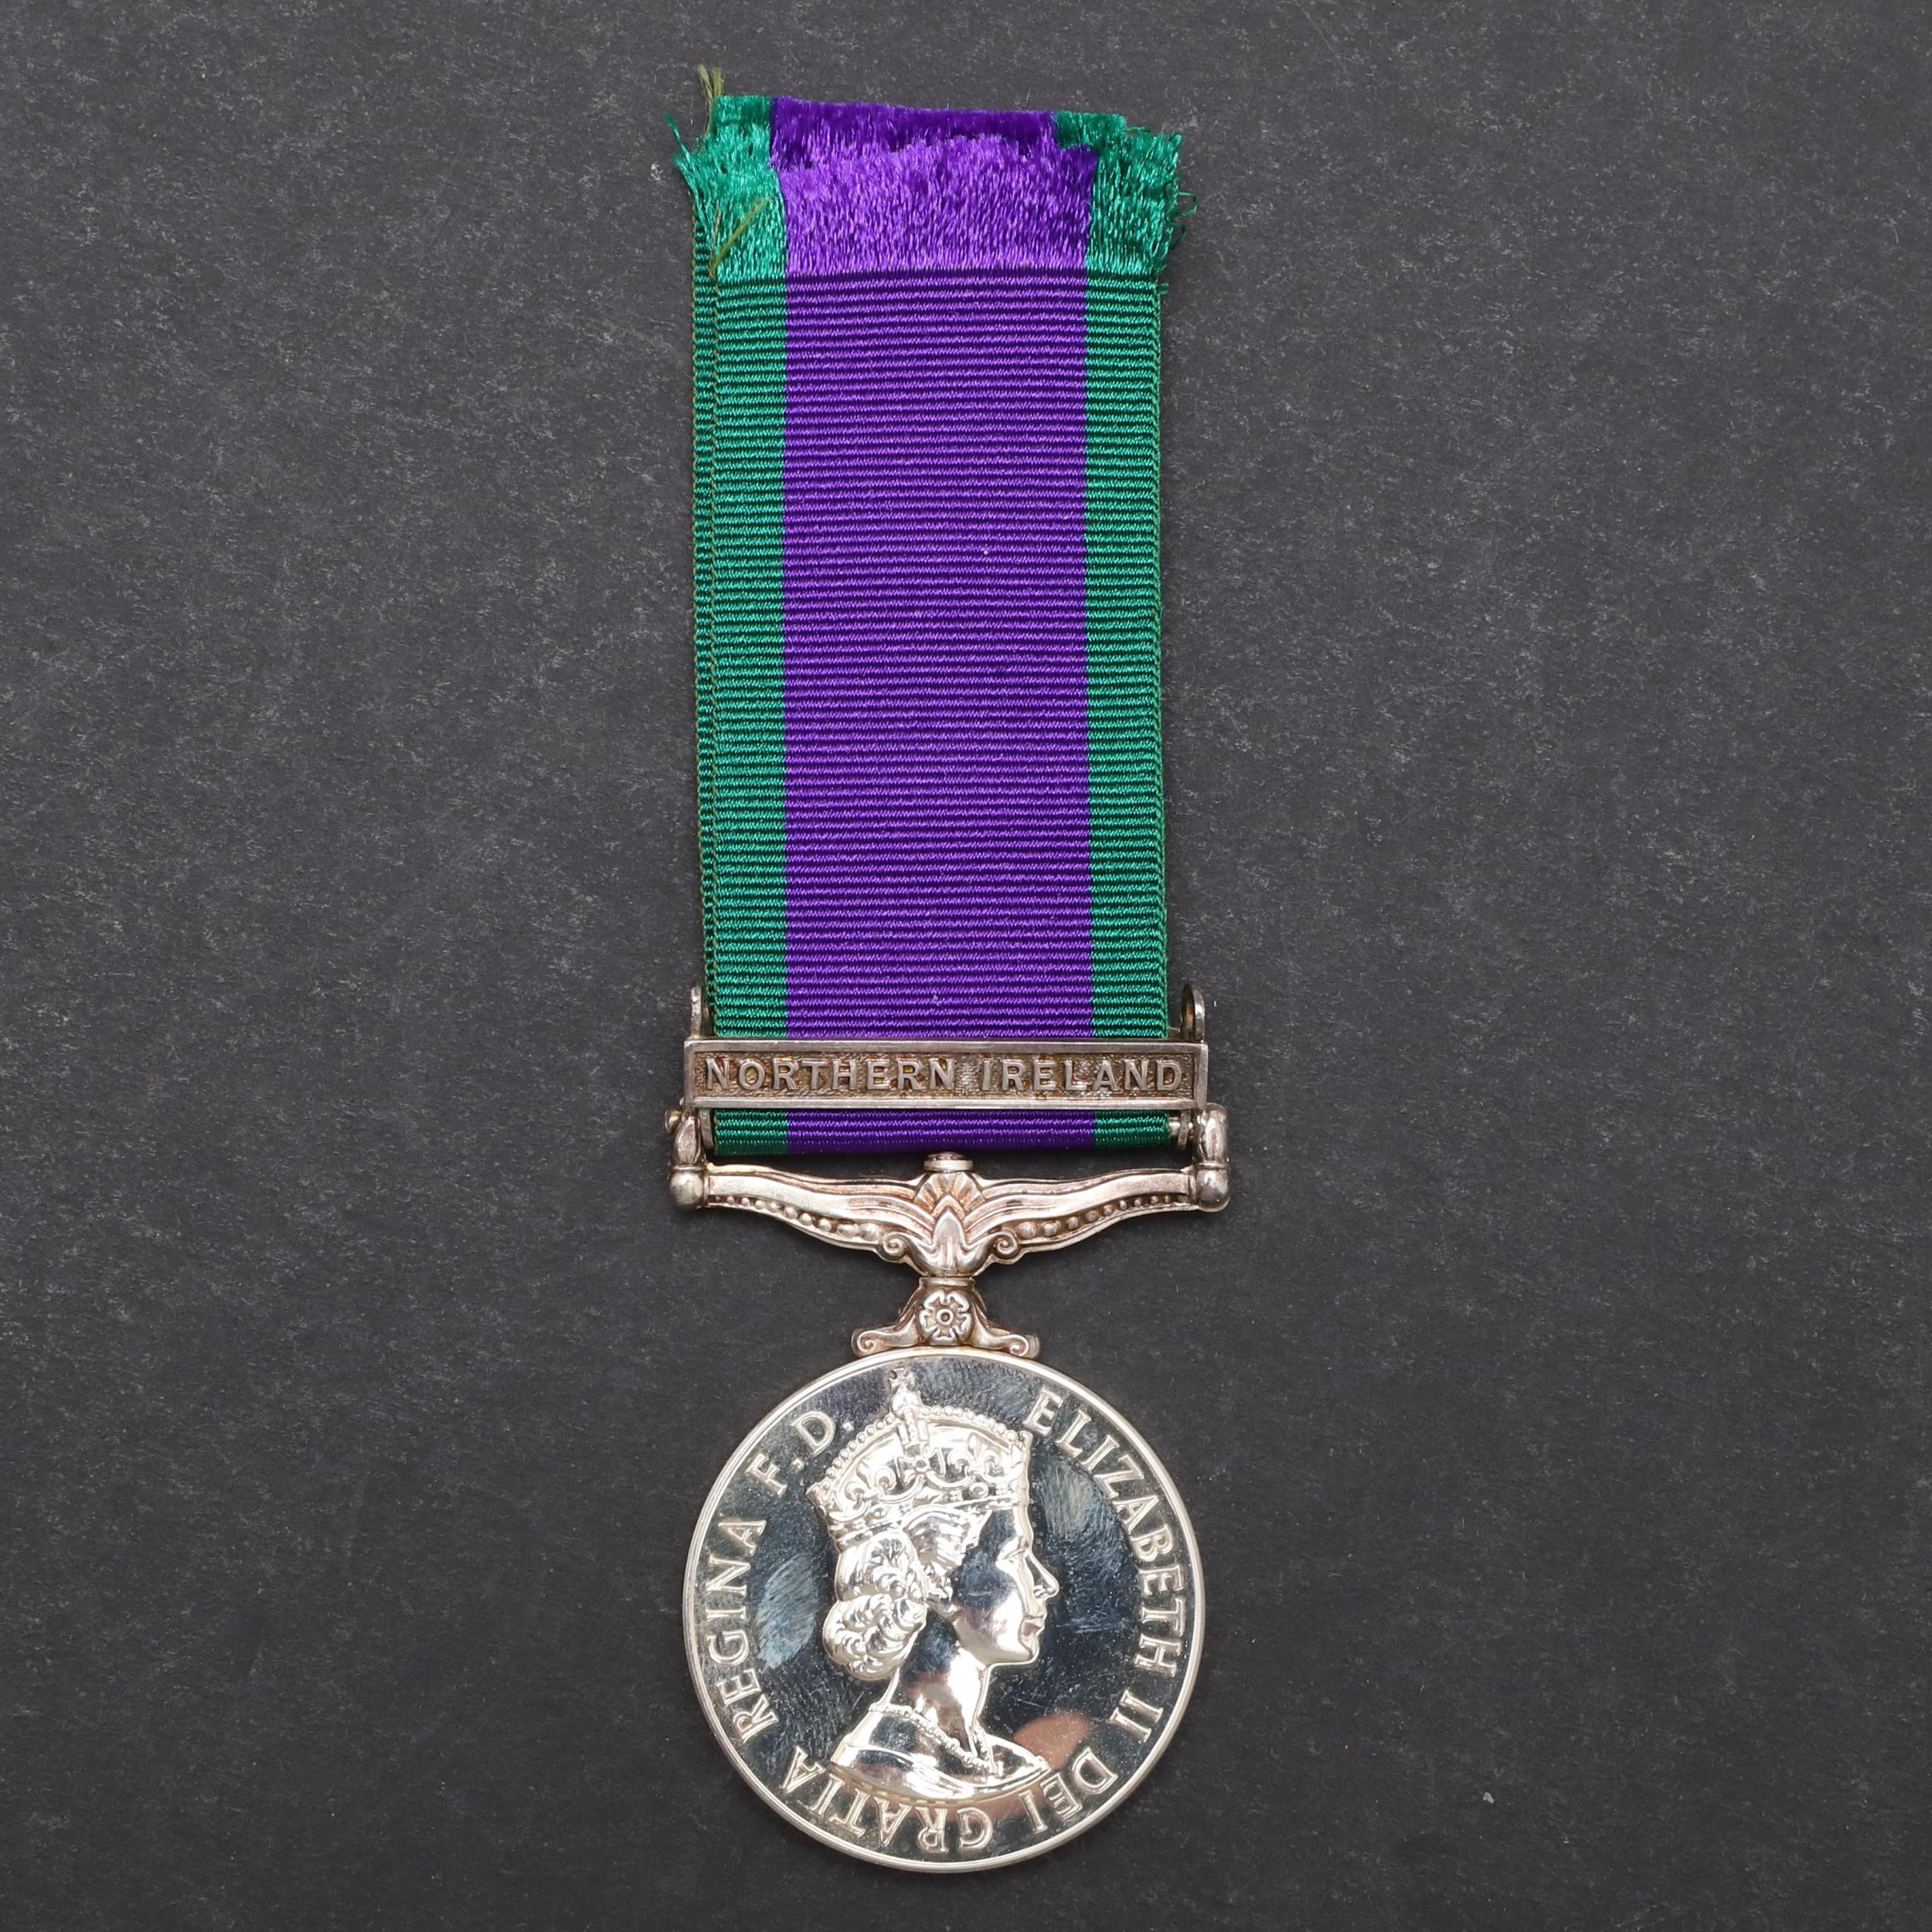 A GENERAL SERVICE MEDAL WITH NORTHERN IRELAND CLASP TO THE ARMED FORCES CHARITY.